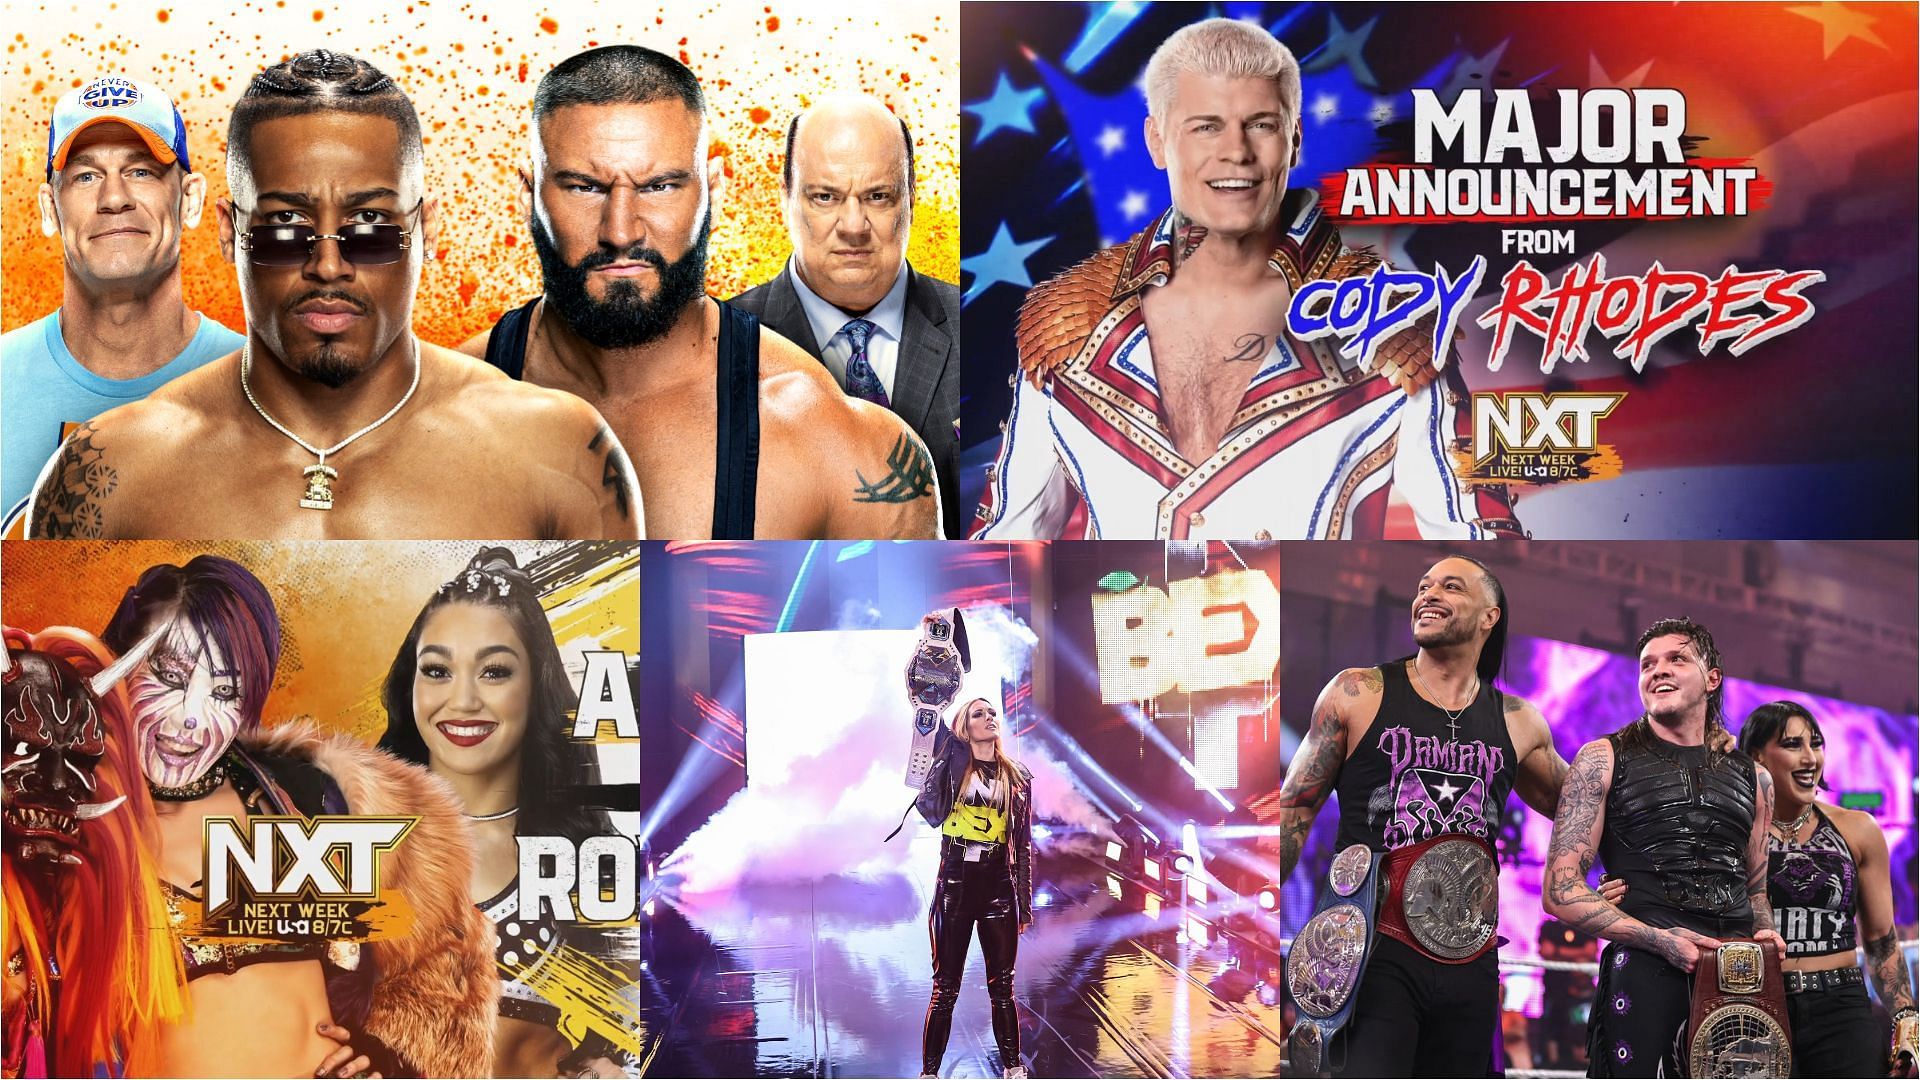 NXT next week will feature an incredible amount of star power